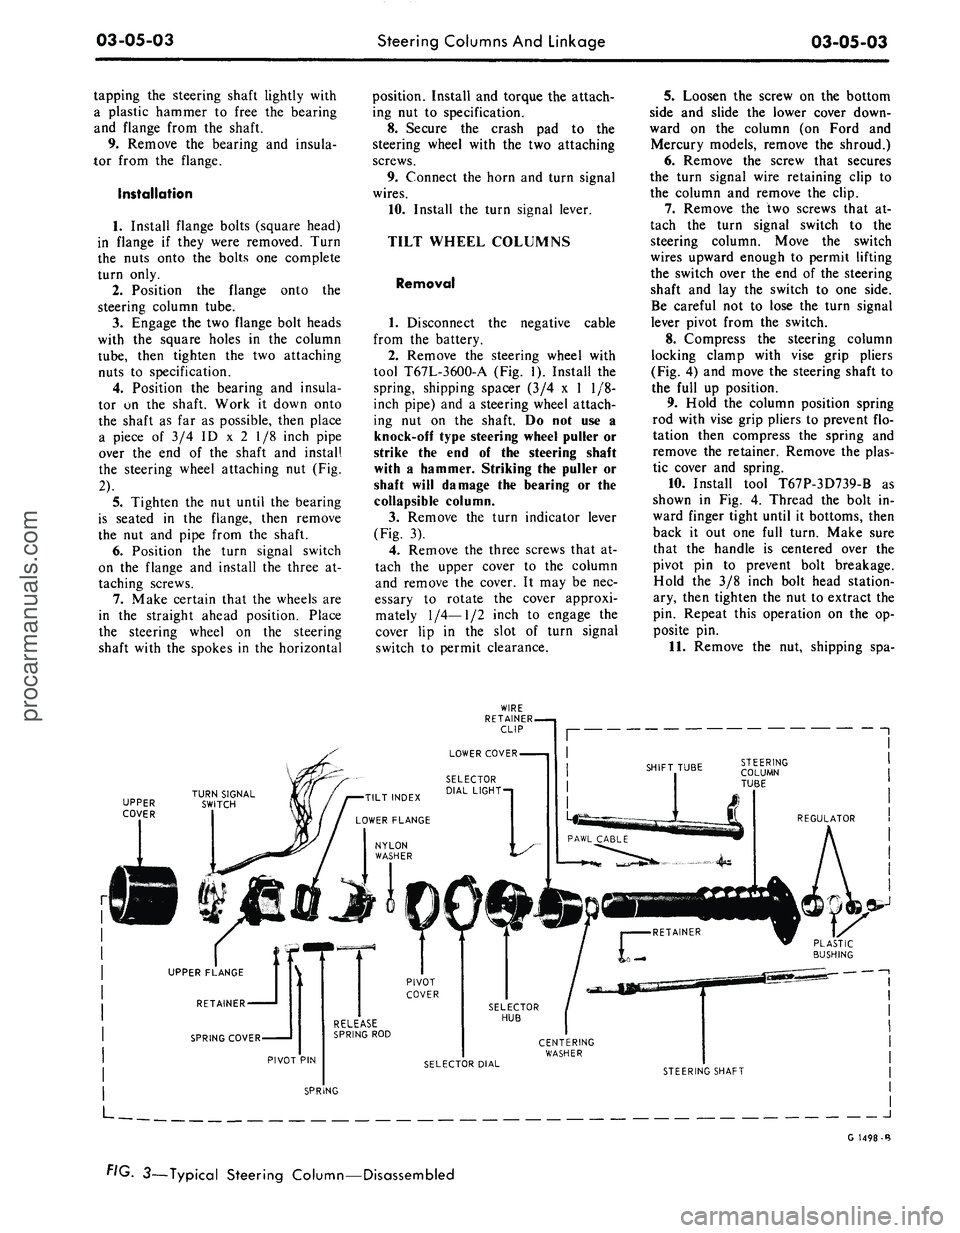 FORD MUSTANG 1969  Volume One Chassis 
03-05-03 
Steering Columns And Linkage

03-05-03

tapping the steering shaft lightly with

a plastic hammer to free the bearing

and flange from the shaft.

9. Remove the bearing and insula-

tor fro